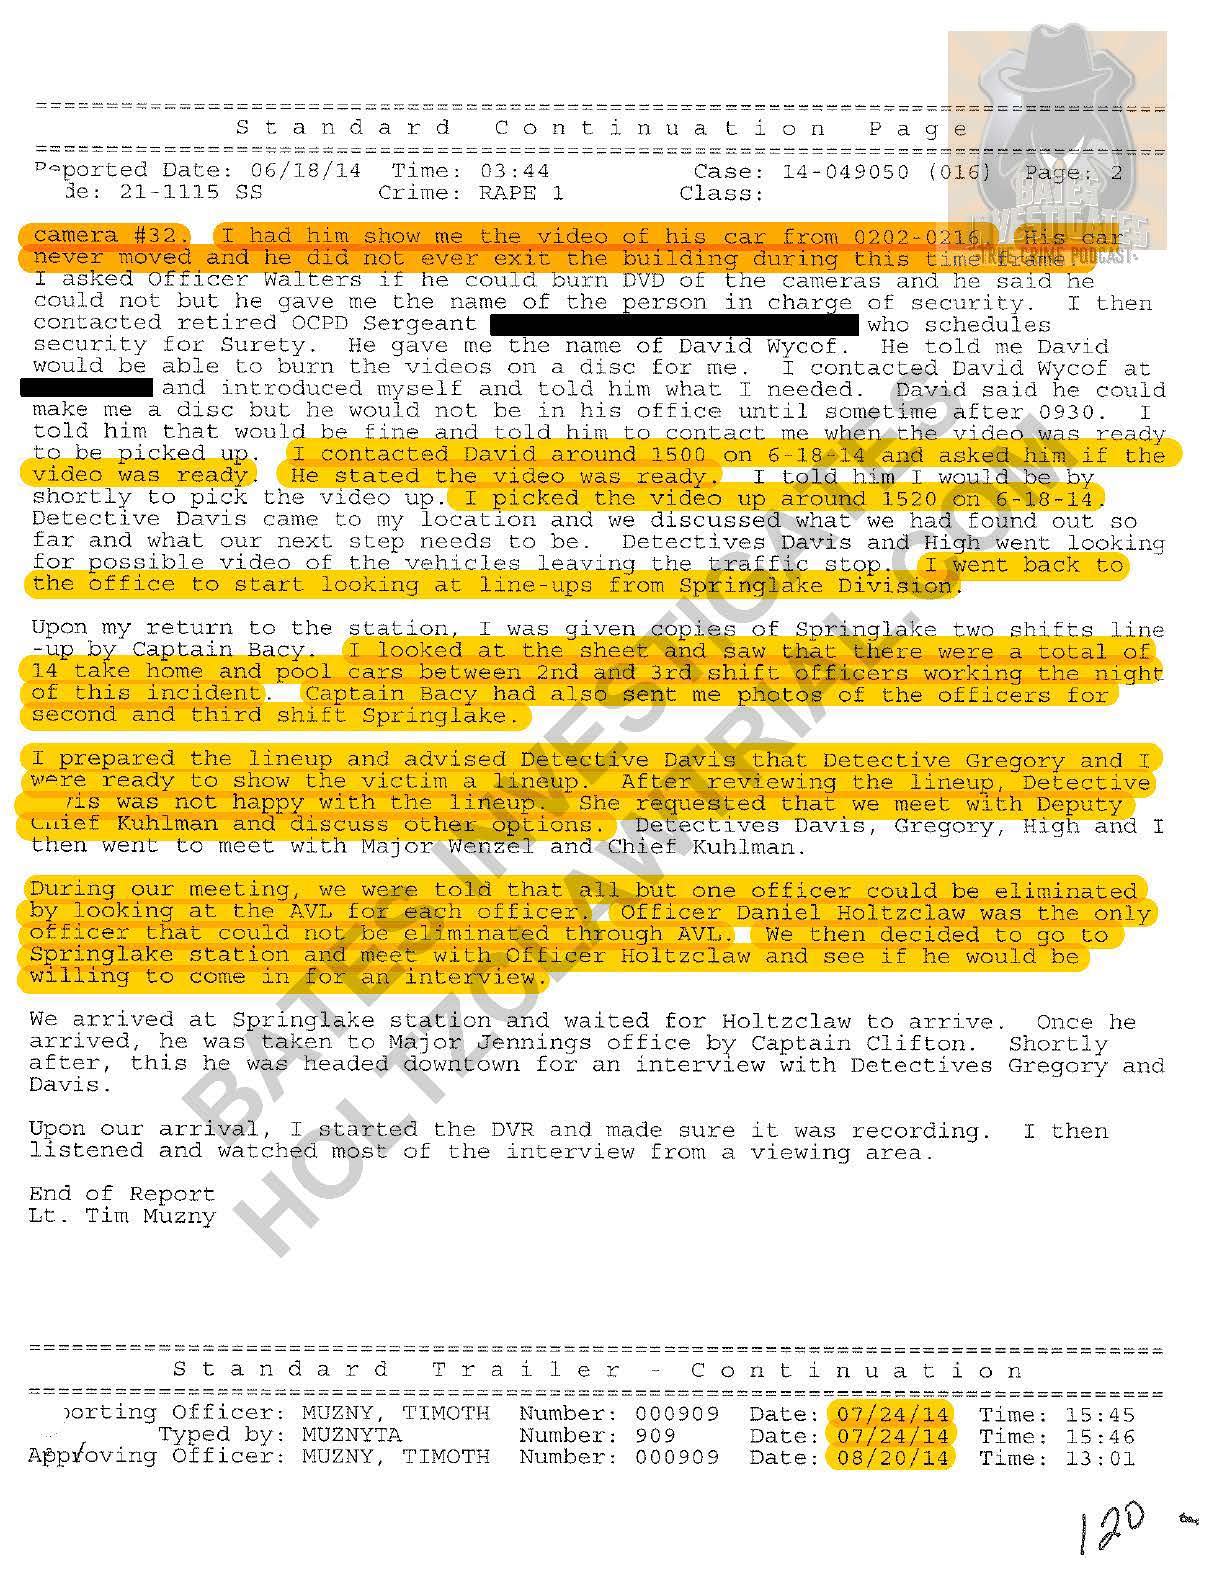 Holtzclaw - Ep02 - Police Reports Watermarked_Page_16.jpg